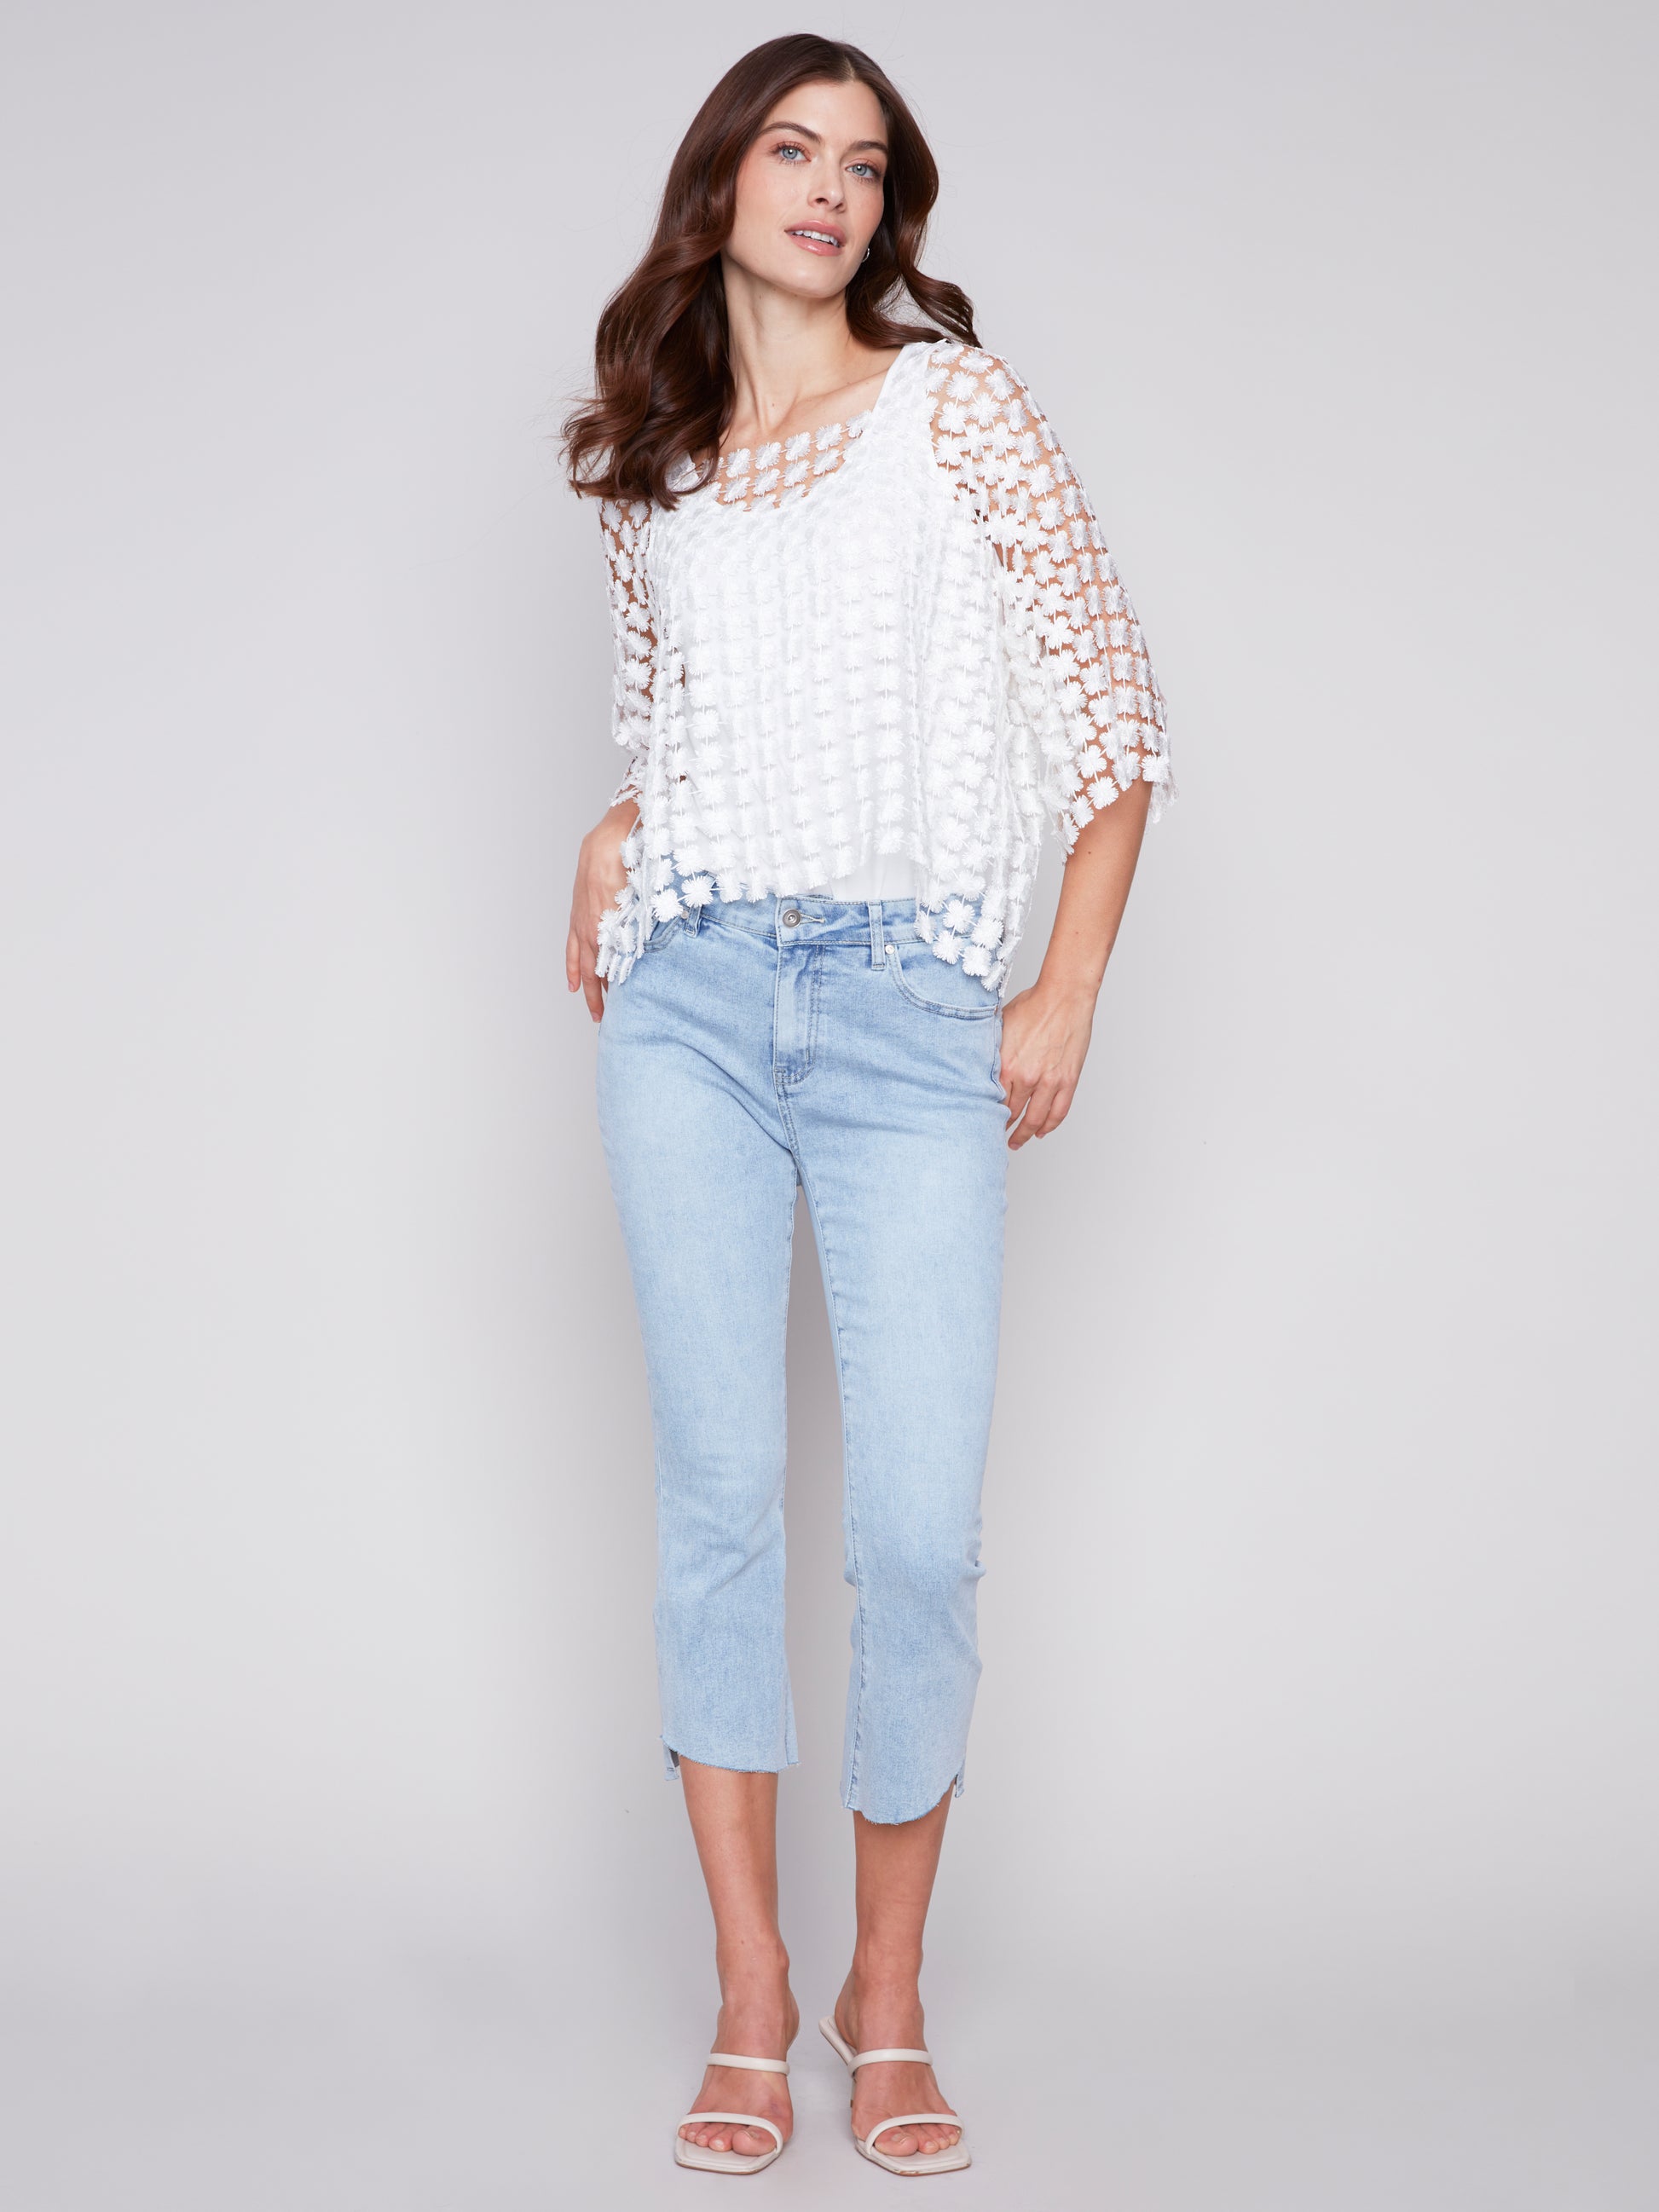 A woman wearing jeans and a white Charlie B Flower Embroidered Blouse.